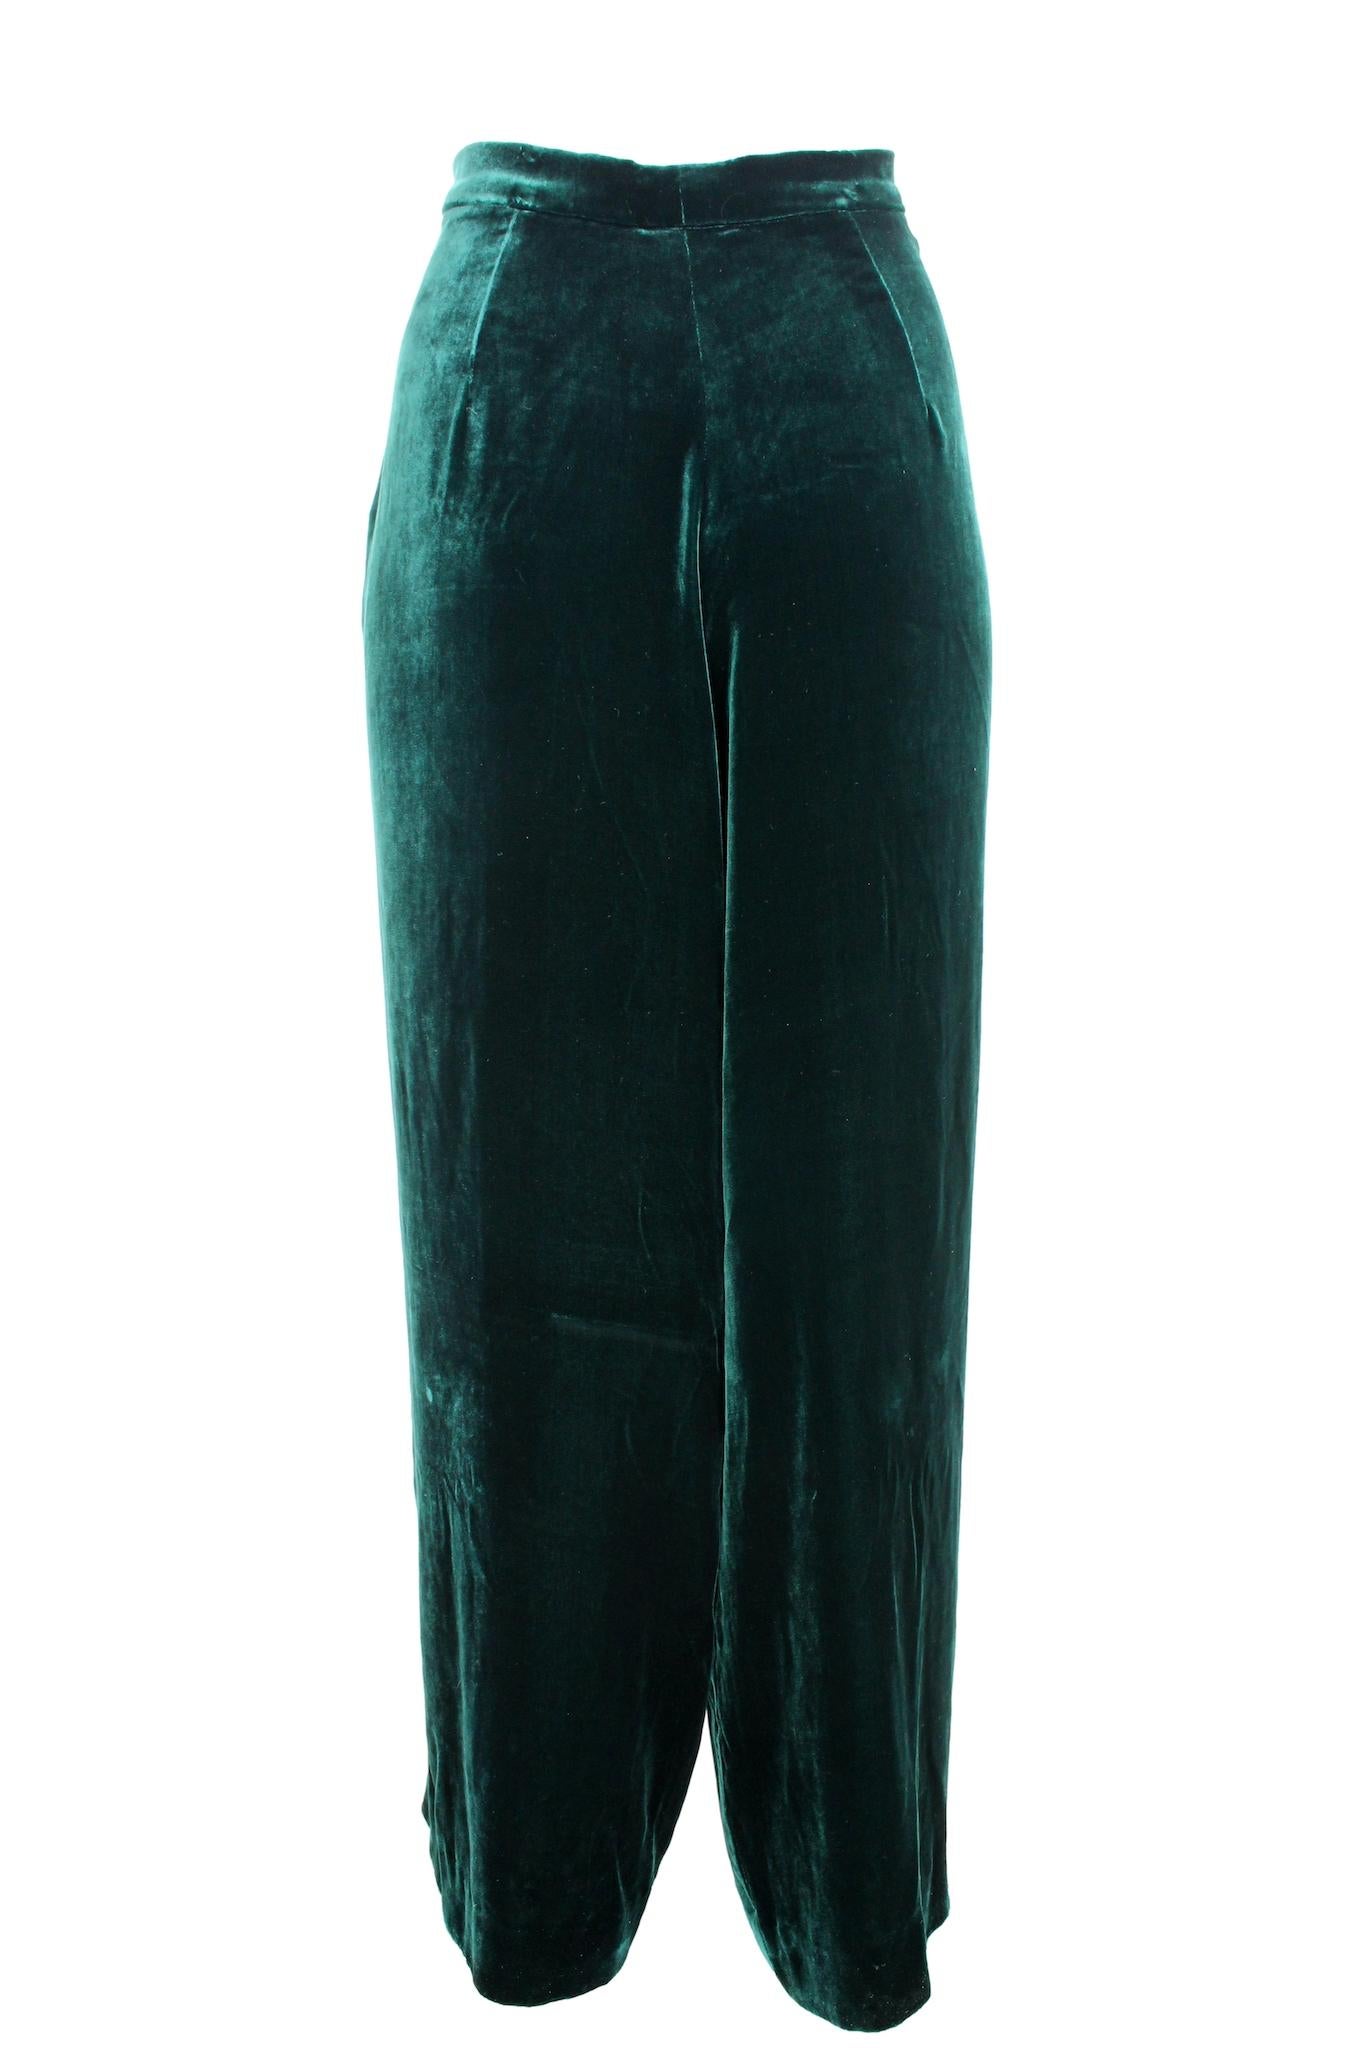 These straight trousers from Luisa Spagnoli are elegant and sophisticated, perfect for any occasion. They are made from a combination of green silk and velvet, which gives them a luxurious and high-quality look and feel.The combination of silk and